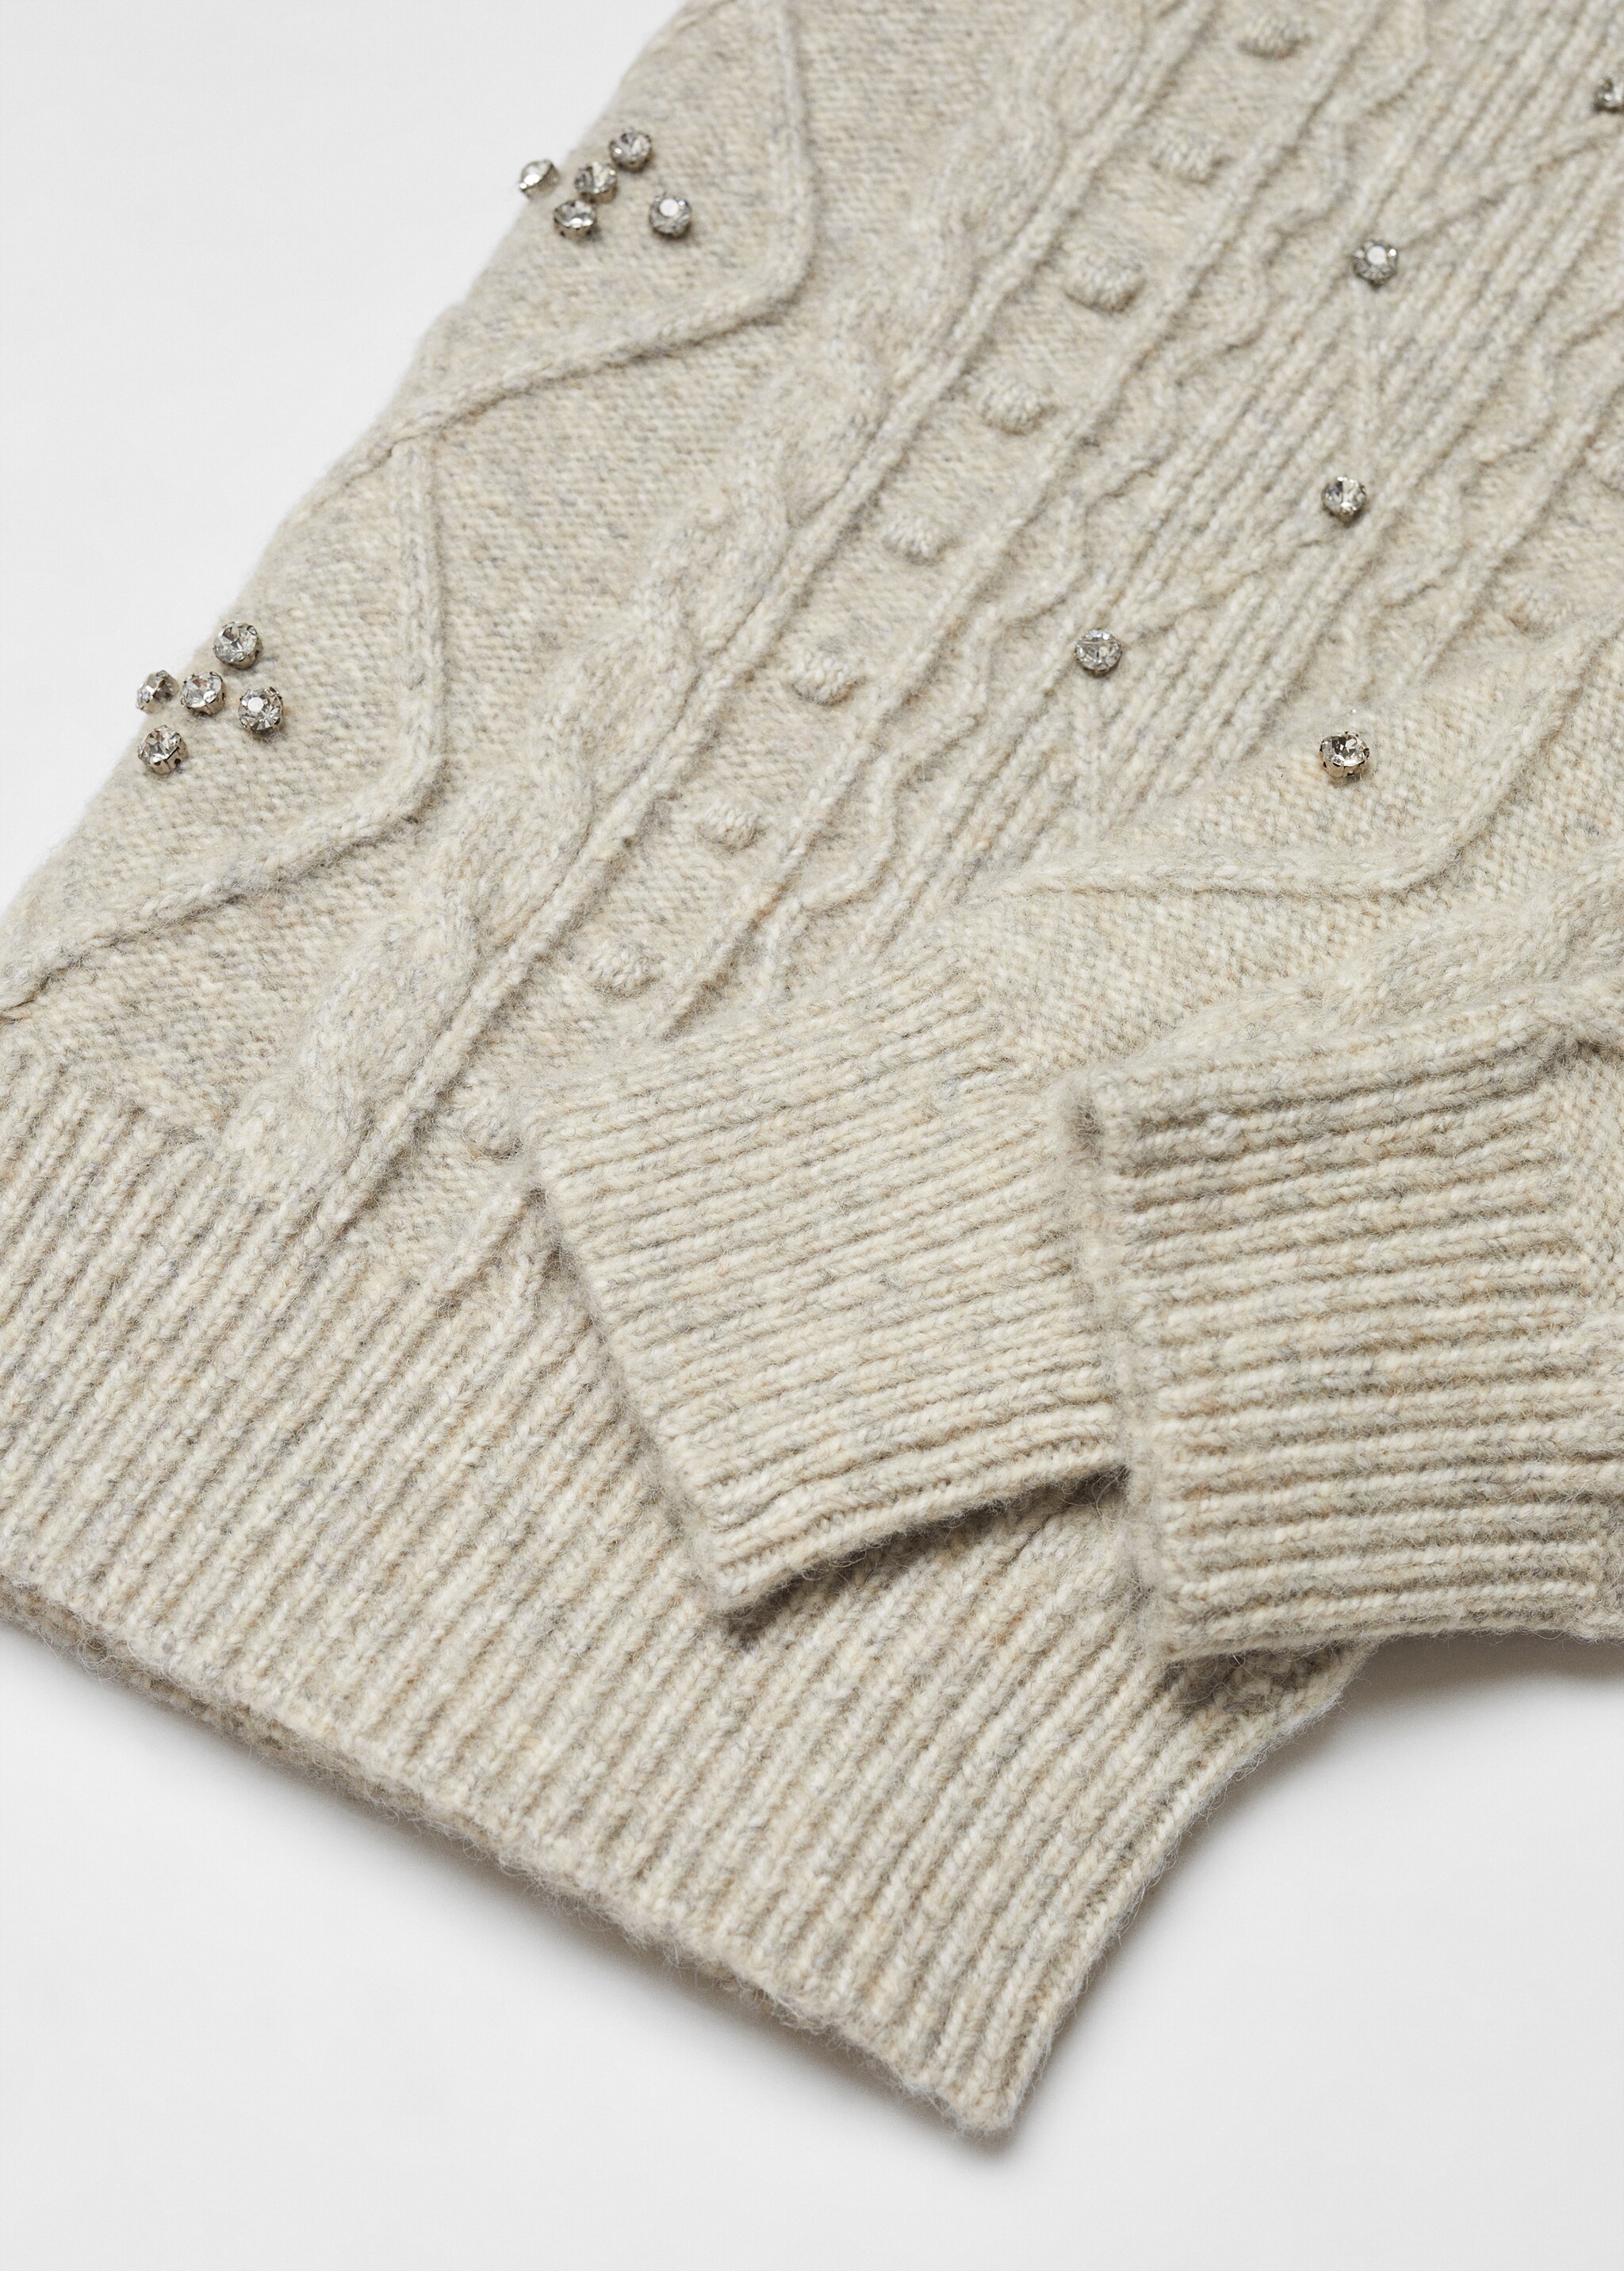 Rhinestone braided sweater - Details of the article 8